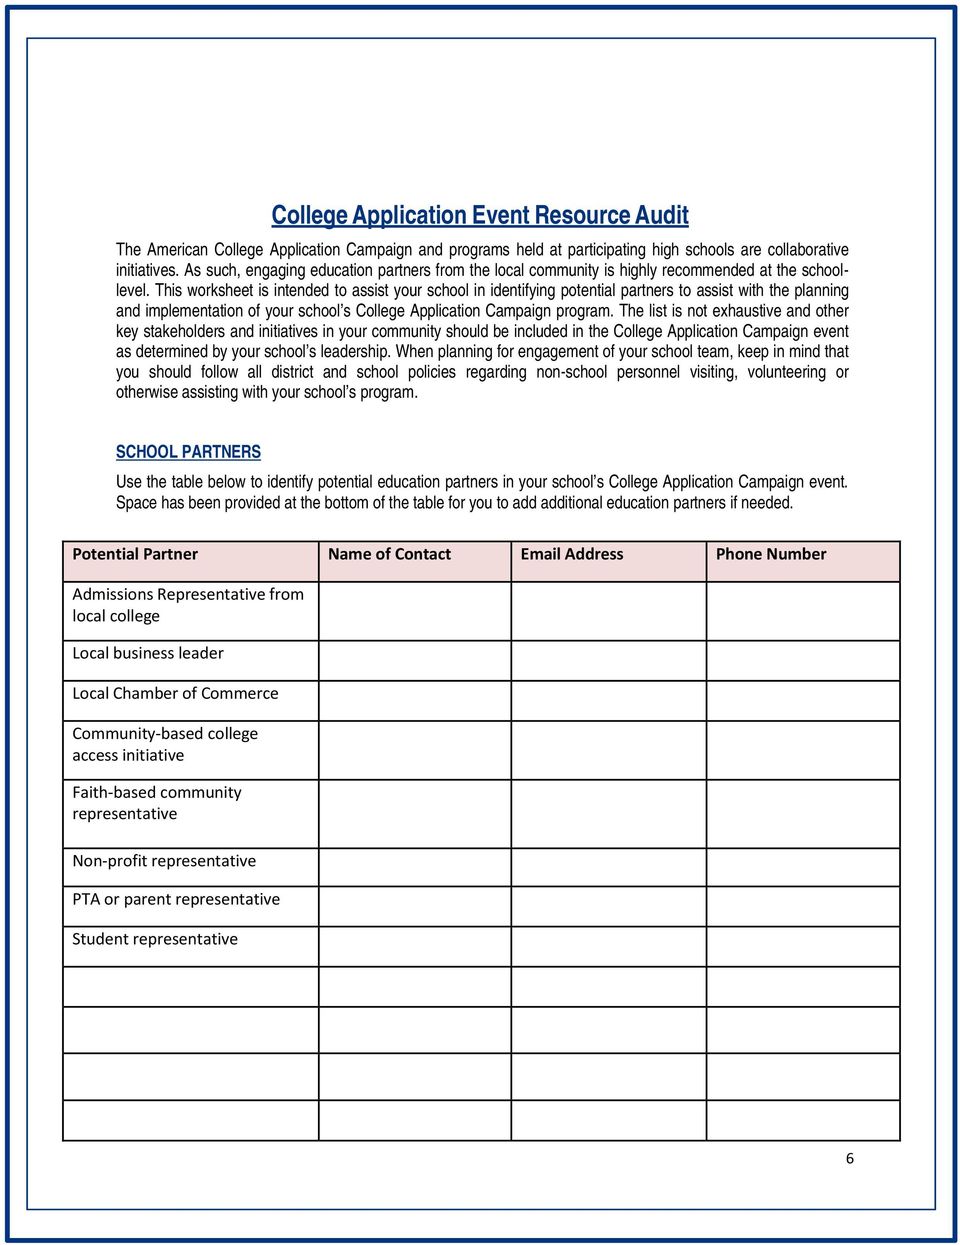 This worksheet is intended to assist your school in identifying potential partners to assist with the planning and implementation of your school s College Application Campaign program.